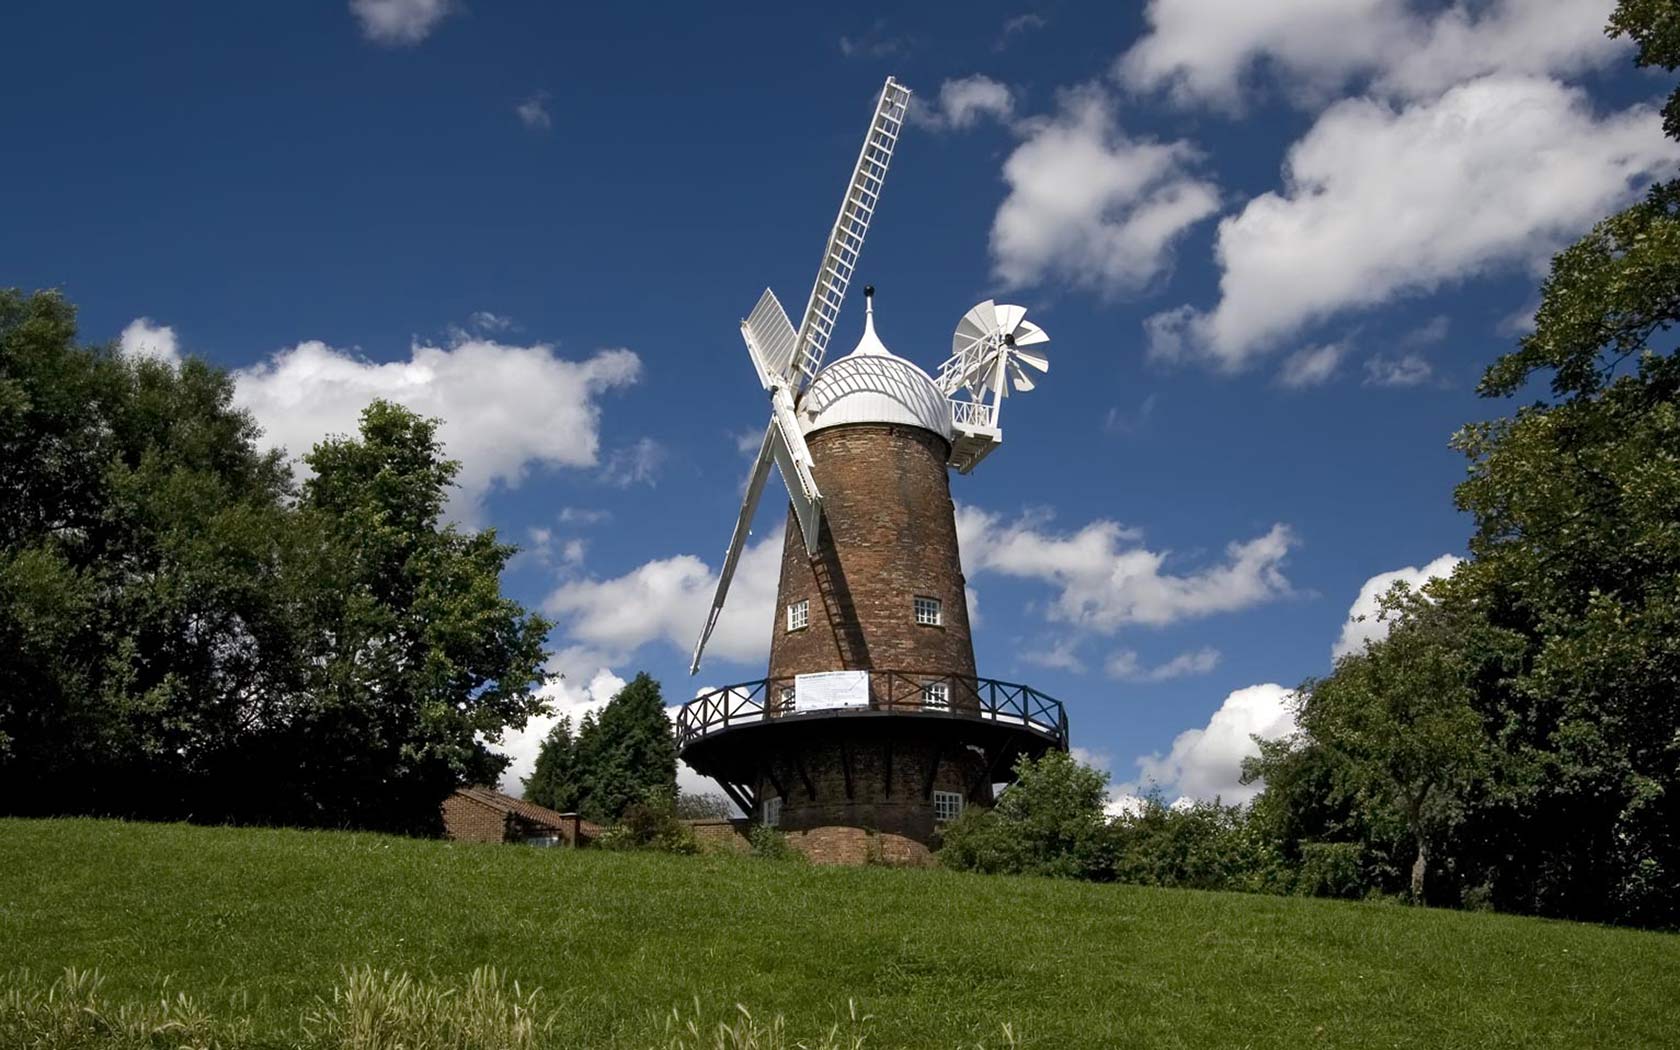 Back To Windmills Wallpaper Gallery